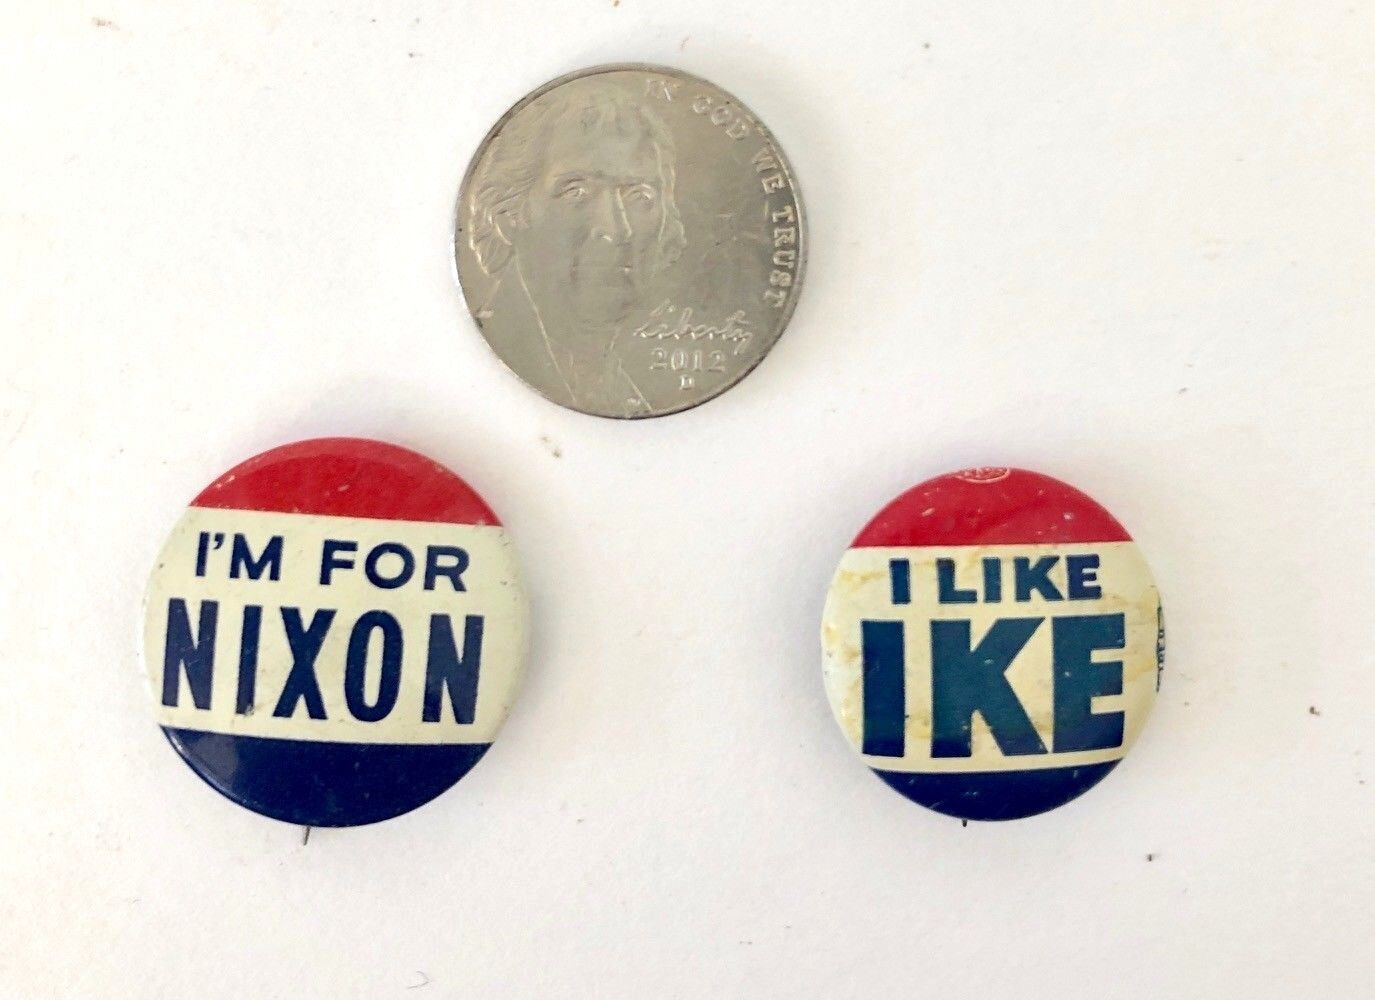 Eisenhower & Nixon Election Pins, 1950s, About the Size of a Nickel, Good Shape